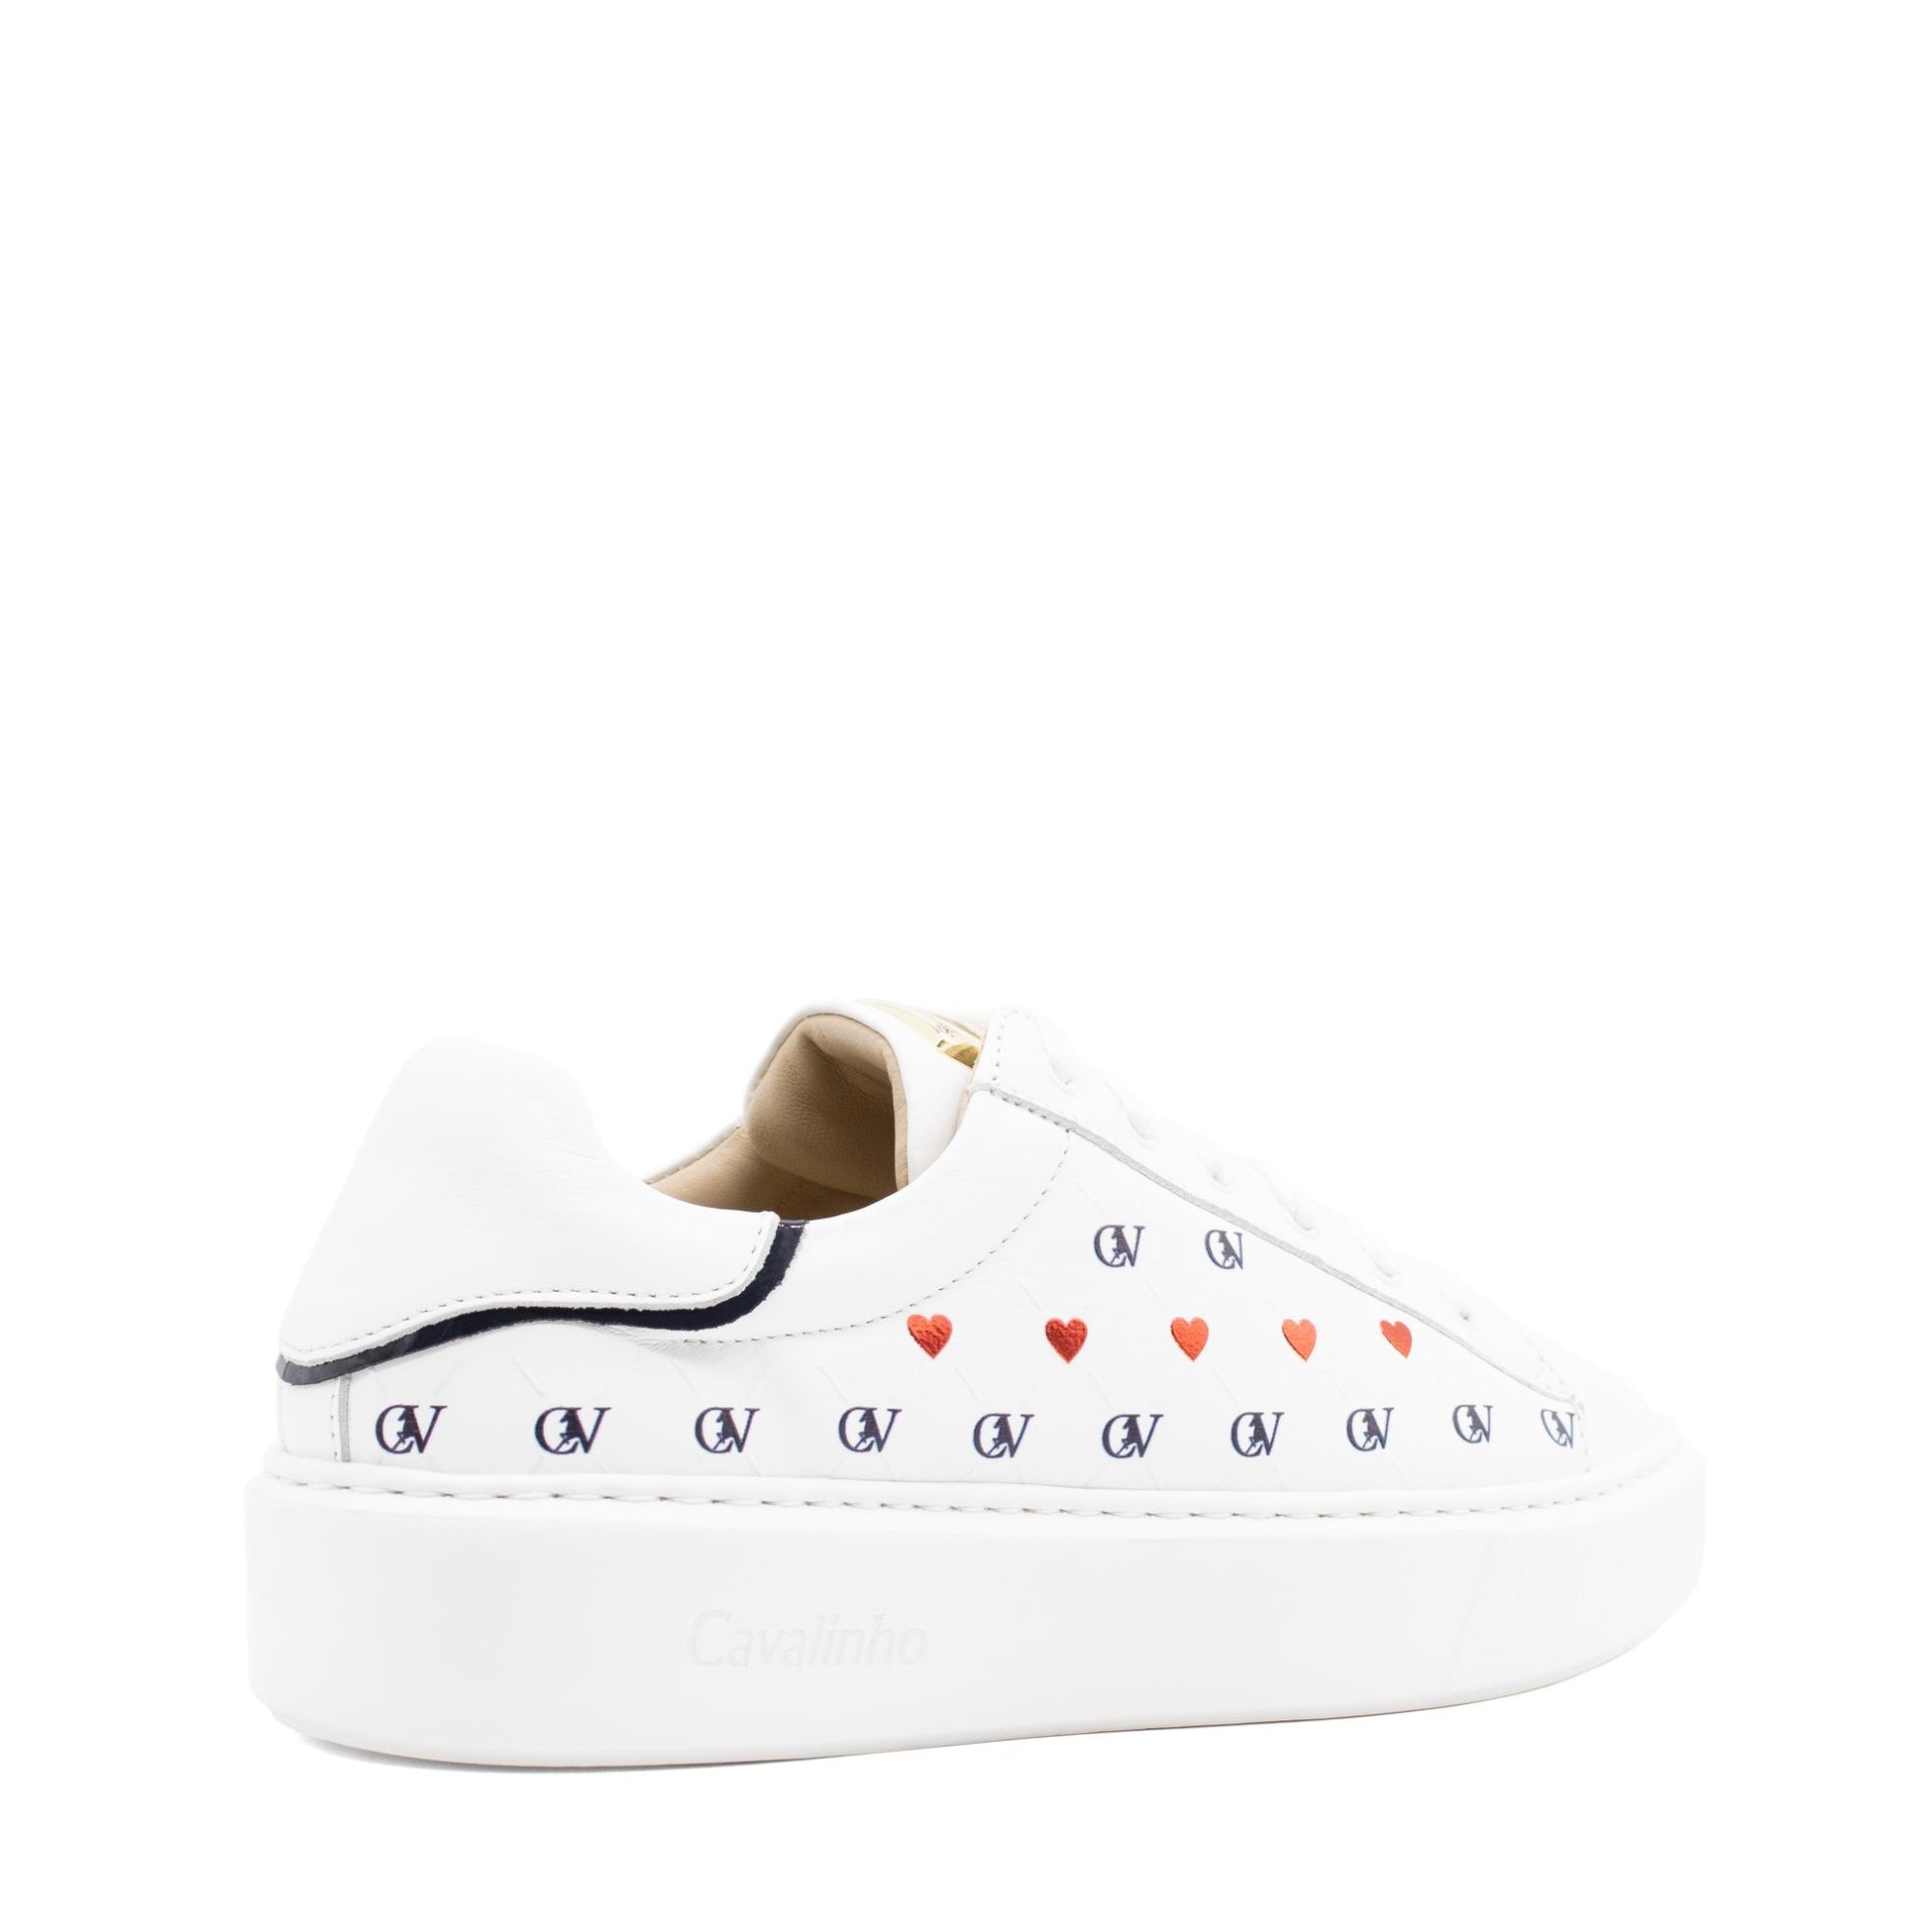 #color_ Navy White Red | Cavalinho Love Yourself Sneakers - Navy White Red - 48010108.22_3